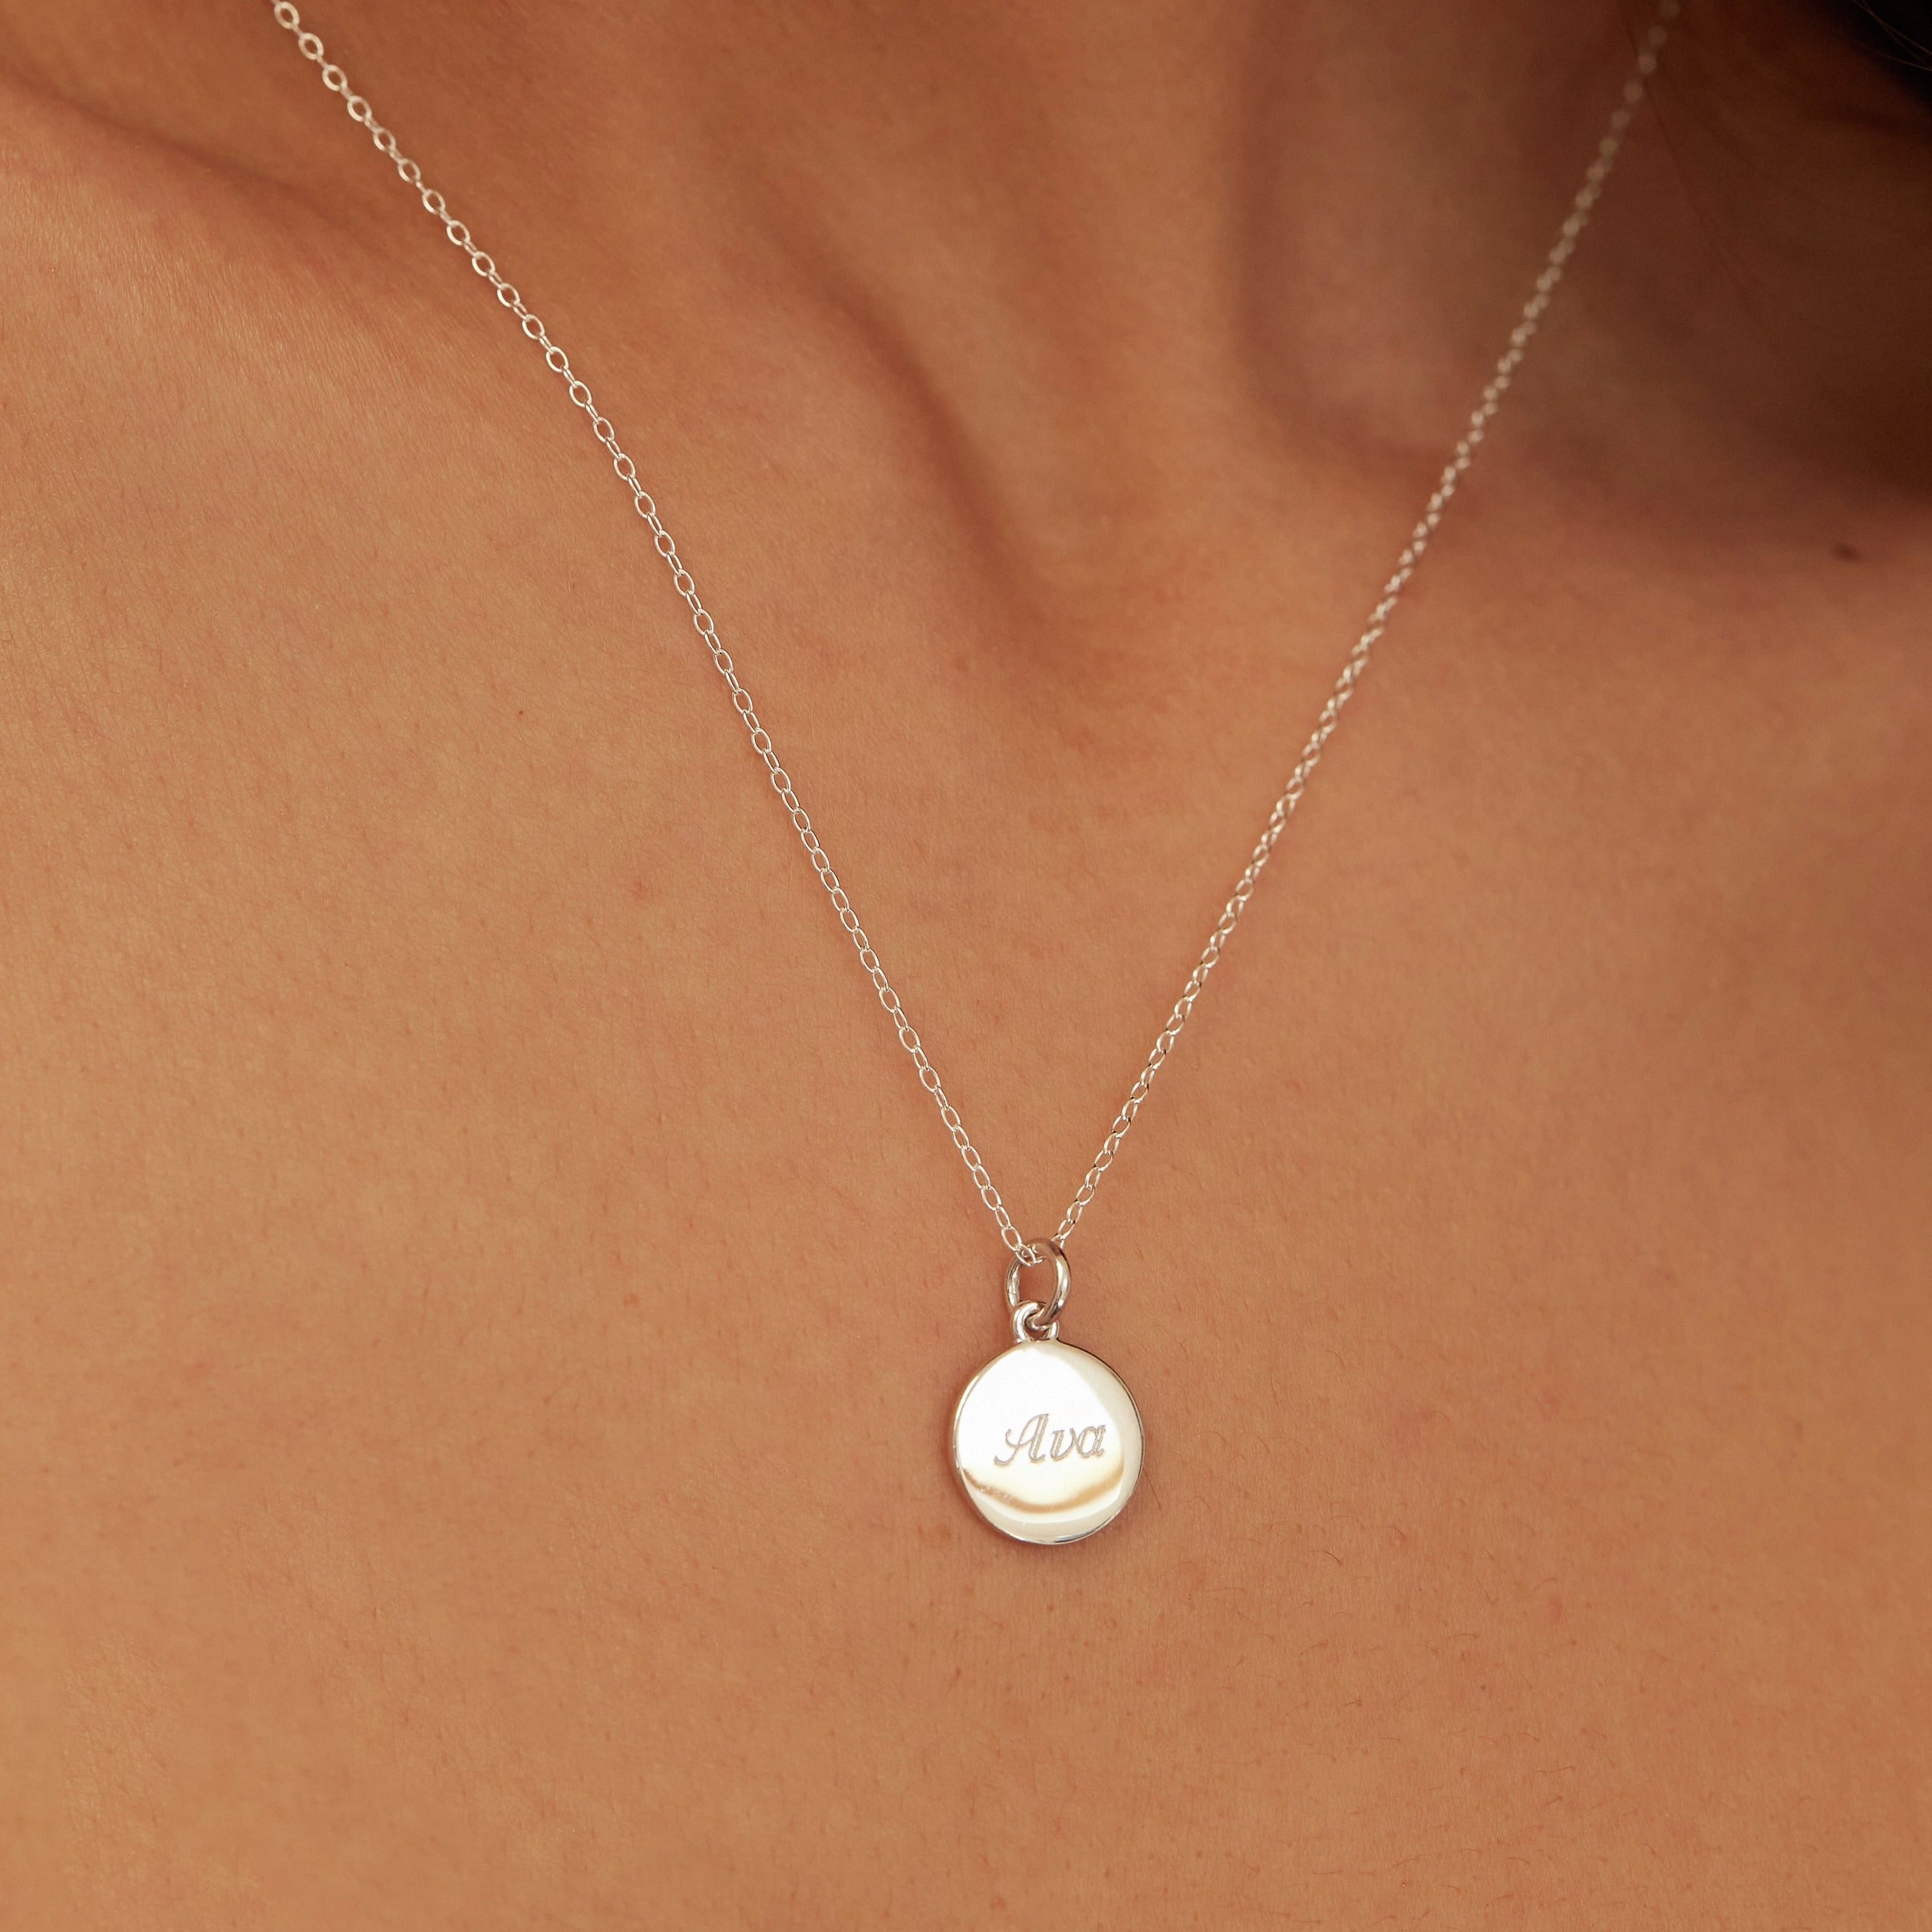 A silver small round engraved disc necklace with the name 'Ava' engraved close up on a chest